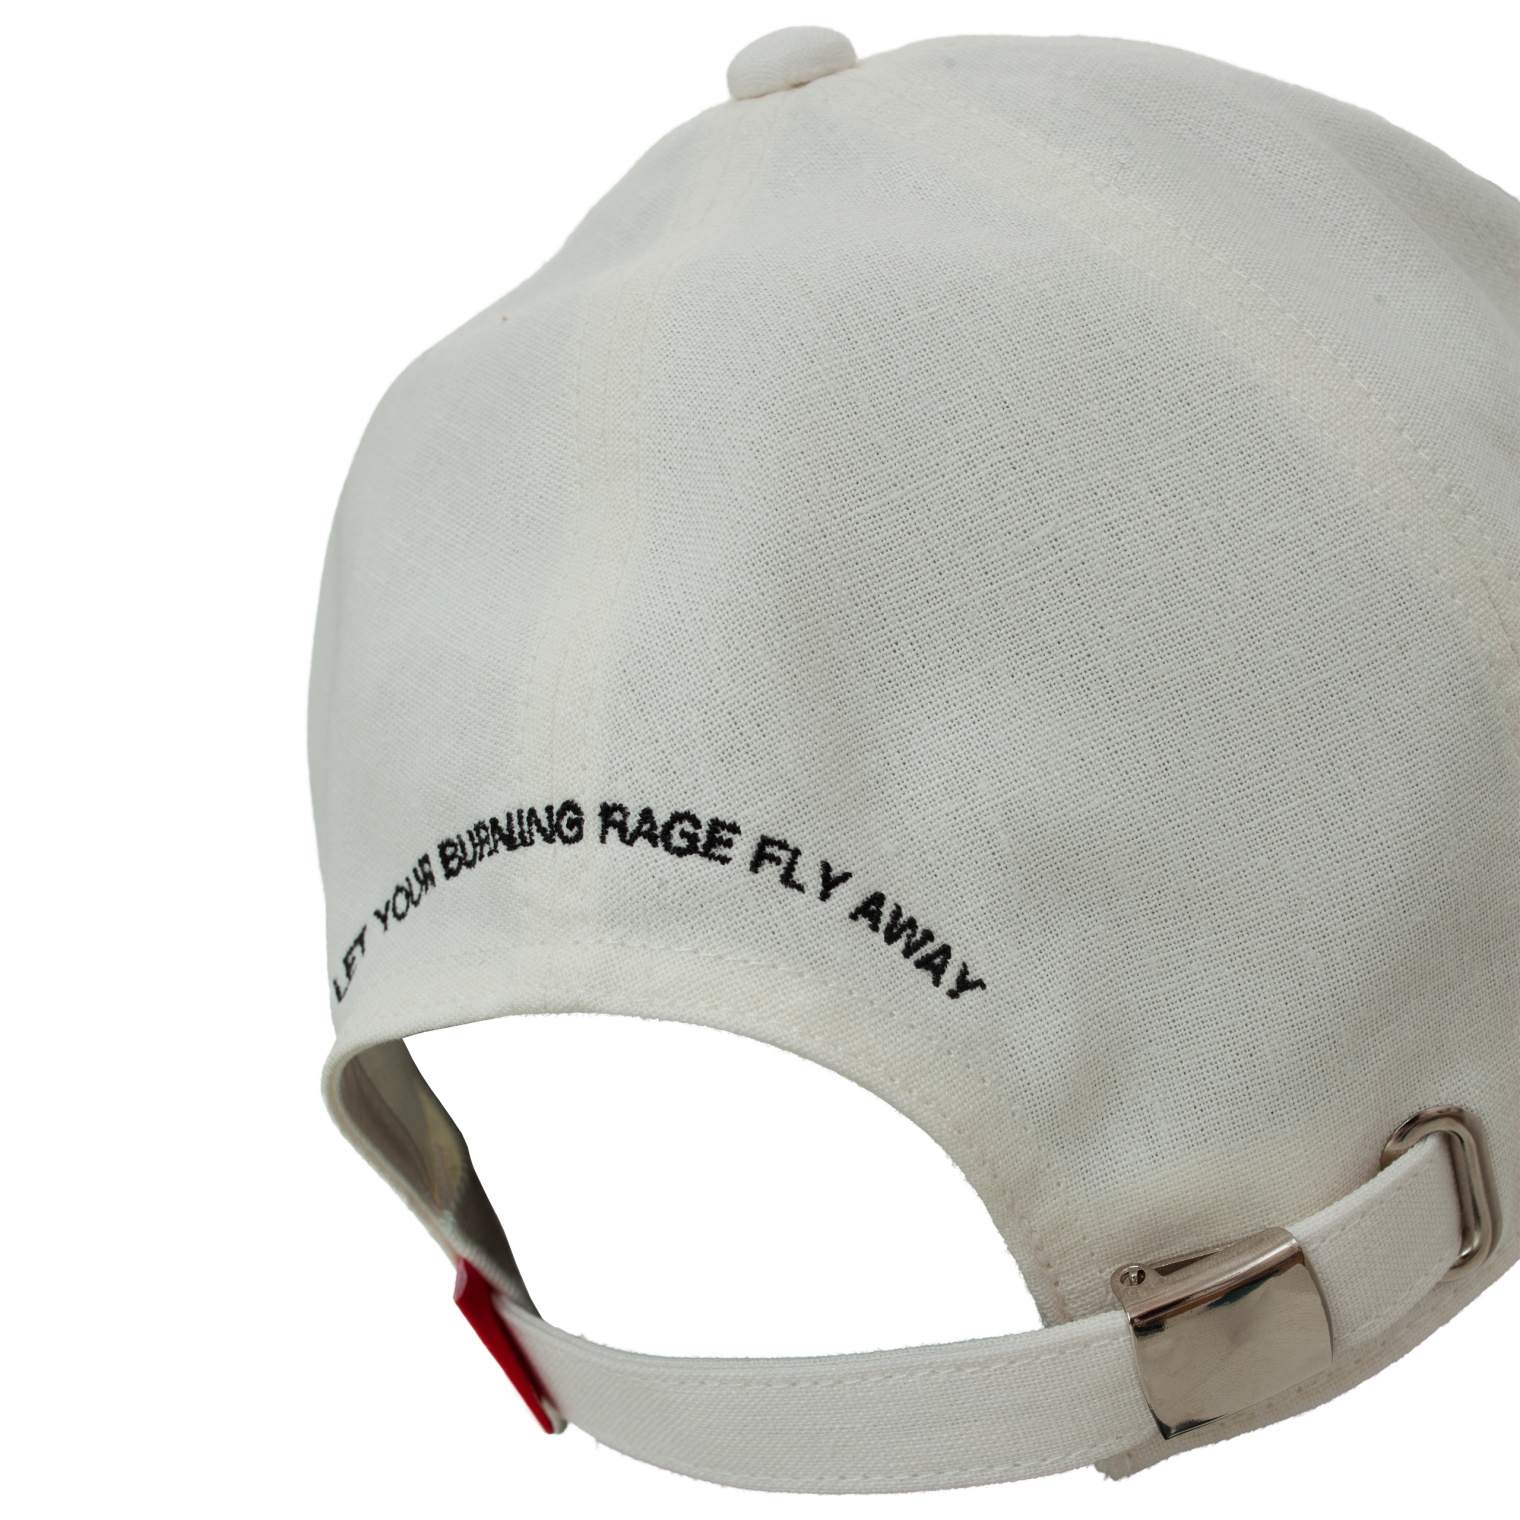 Undercover White embroidered cap